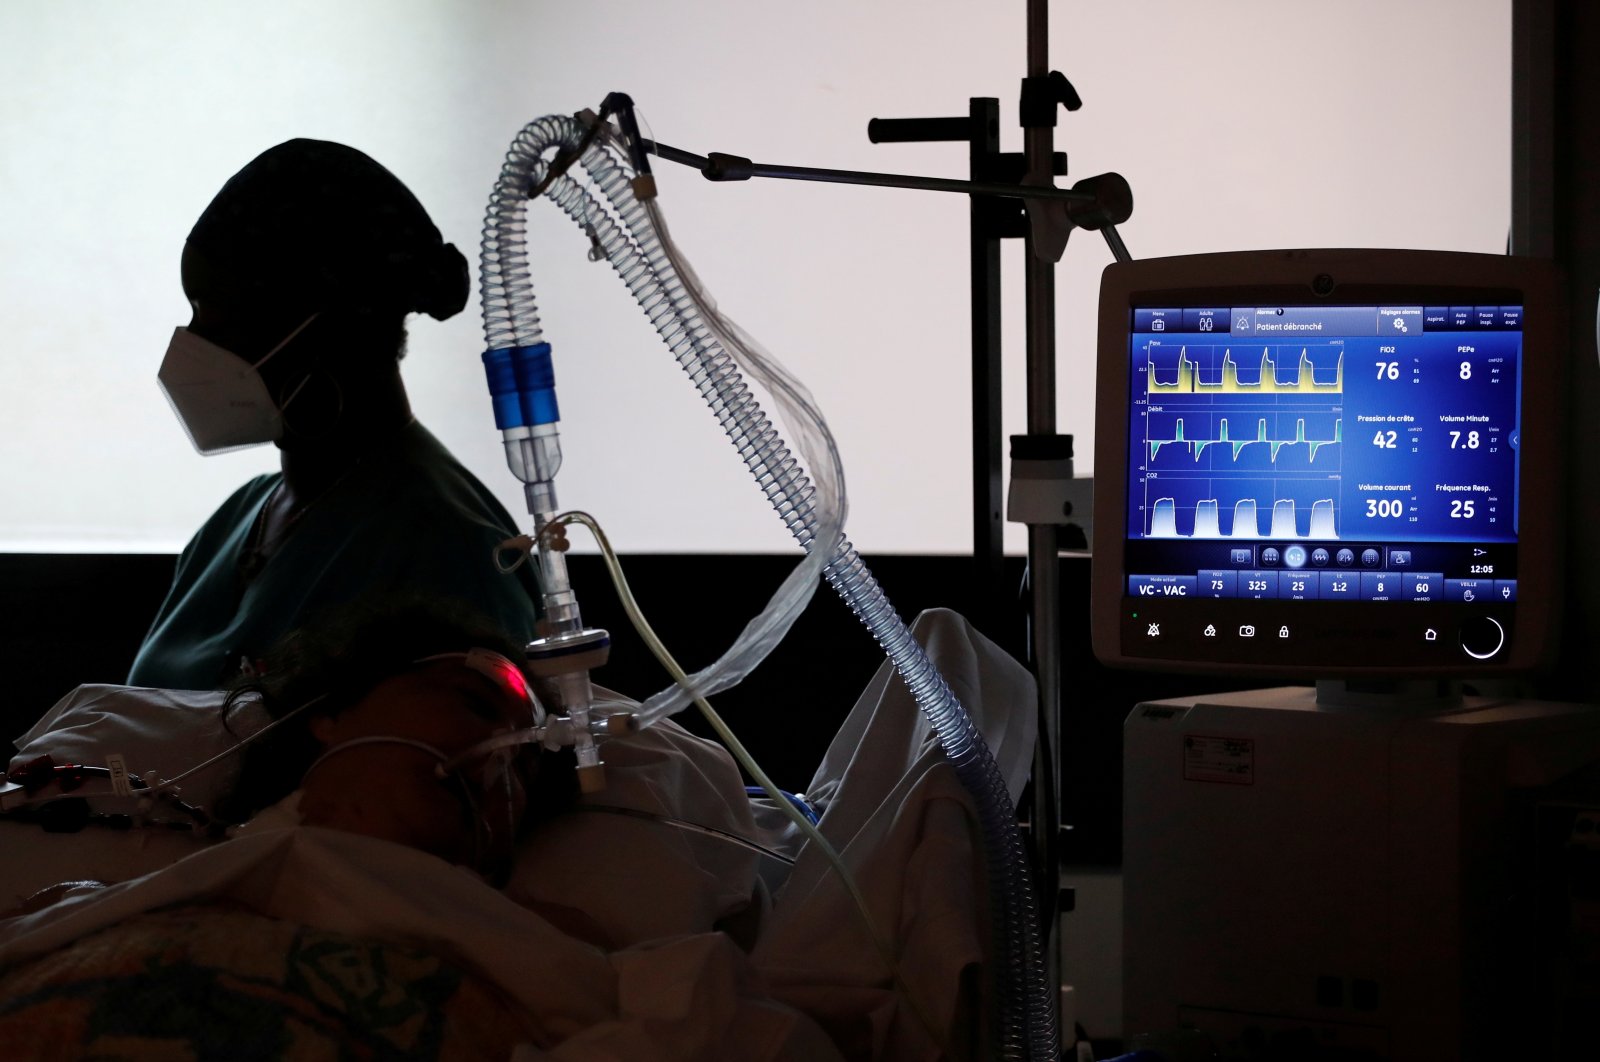 A COVID-19 patient connected to a ventilator tube in the Intensive Care Unit (ICU) at the Centre Cardiologique du Nord private hospital in Saint-Denis, near Paris, amid the coronavirus pandemic in France, May 4, 2021. (Reuters Photo)